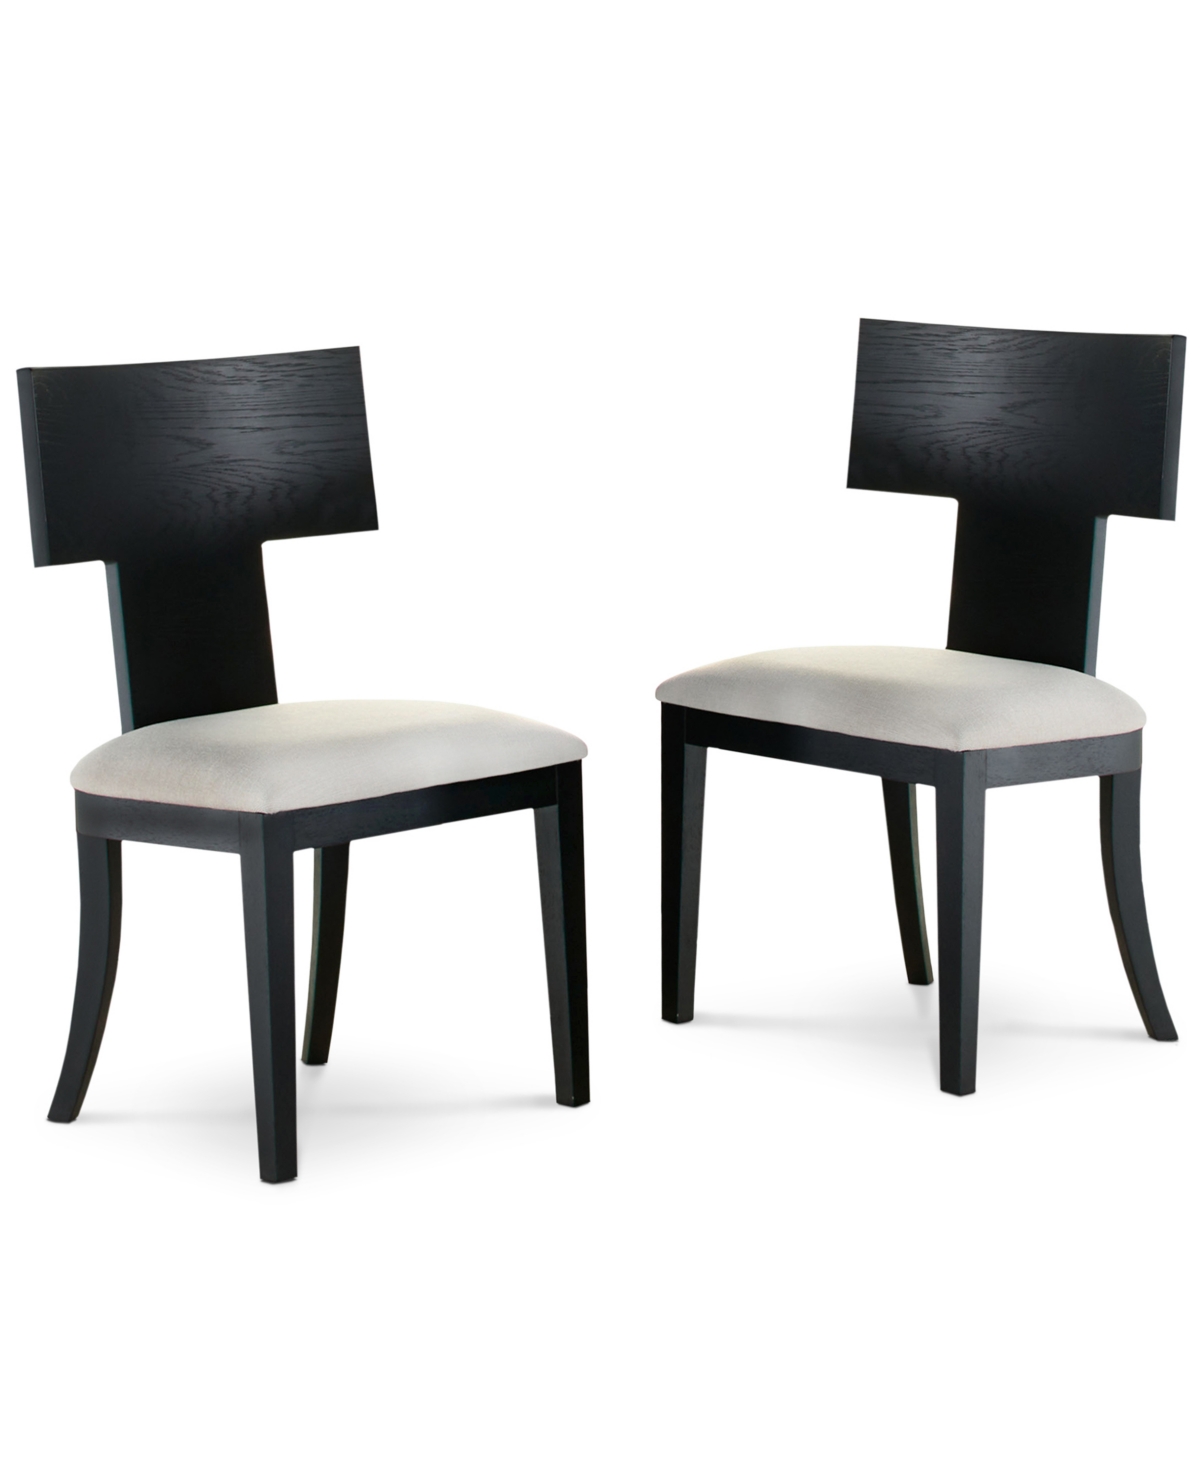 Abbyson Living Avery 38.1" 2 Piece Wood-back Upholstered Counter Stools In Black And Cream